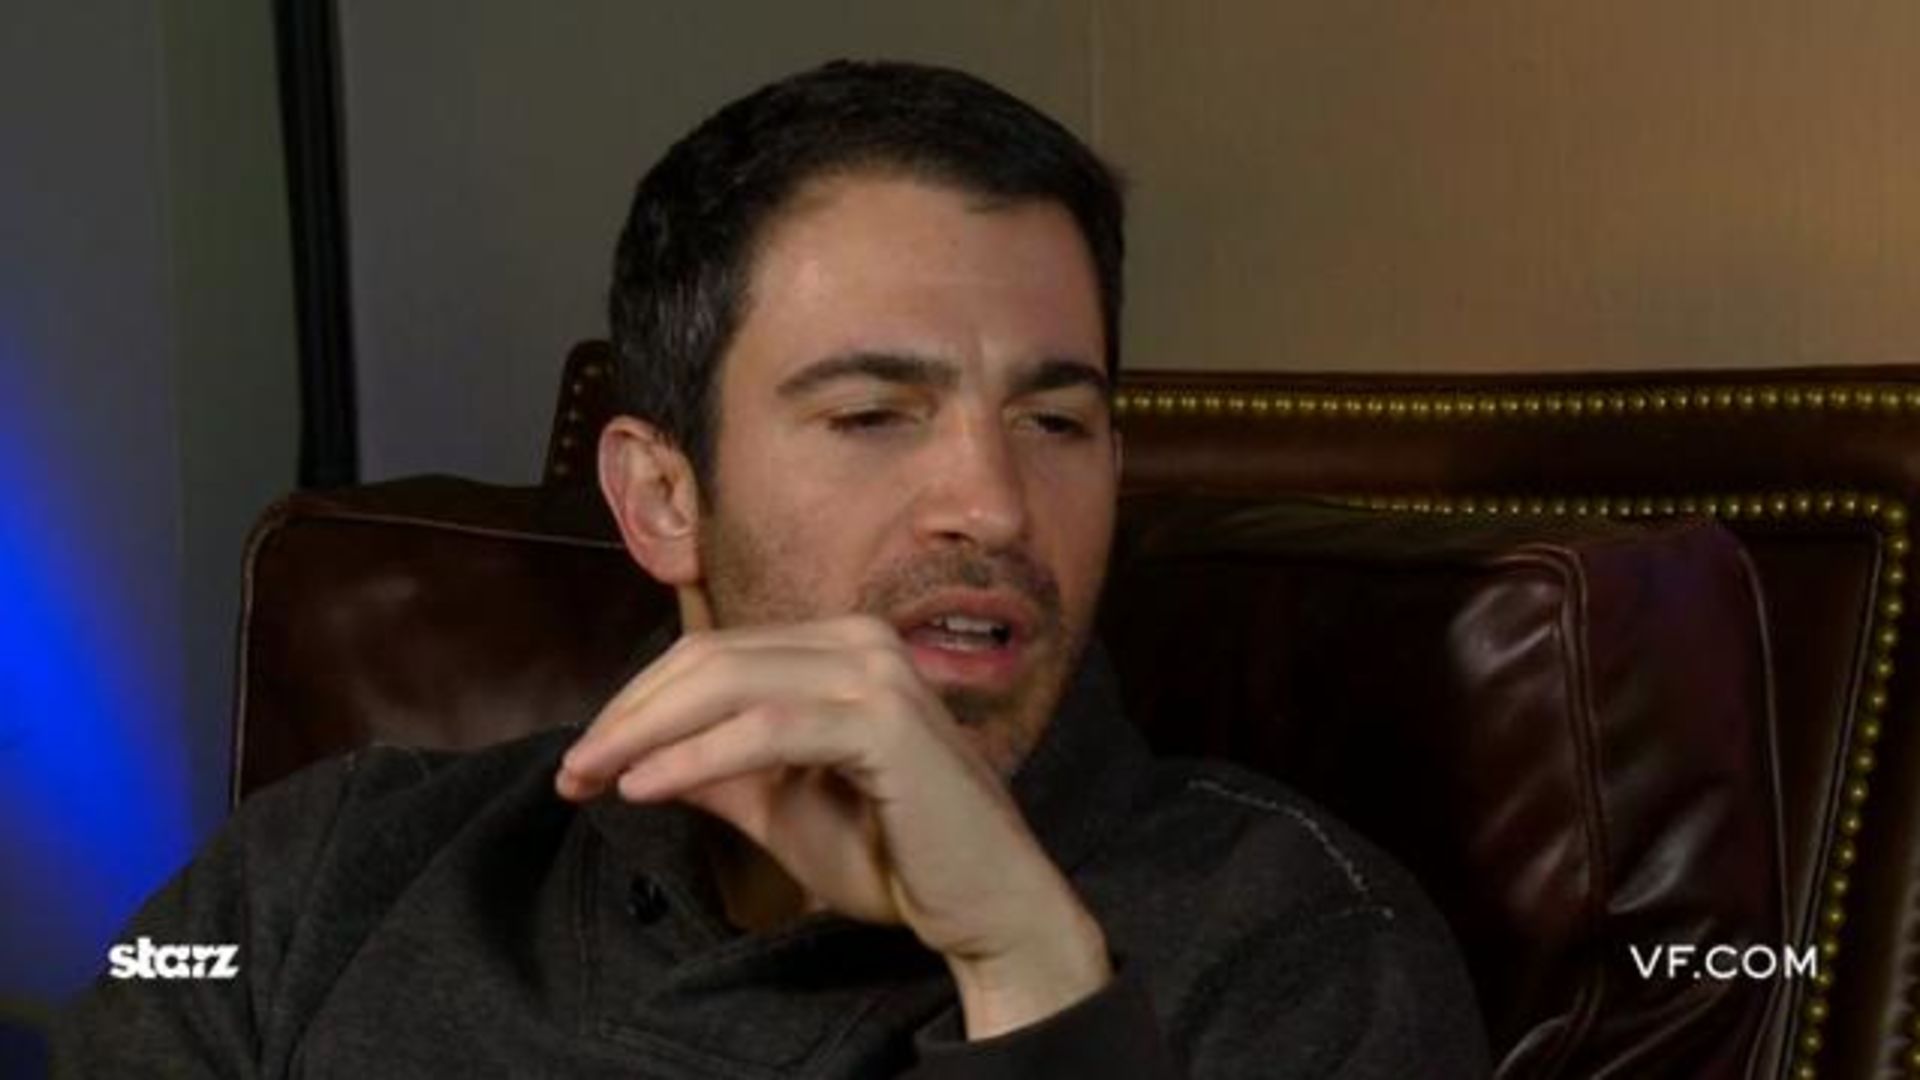 Watch Chris Messina On “celeste And Jesse Forever” And “28 Hotel Rooms